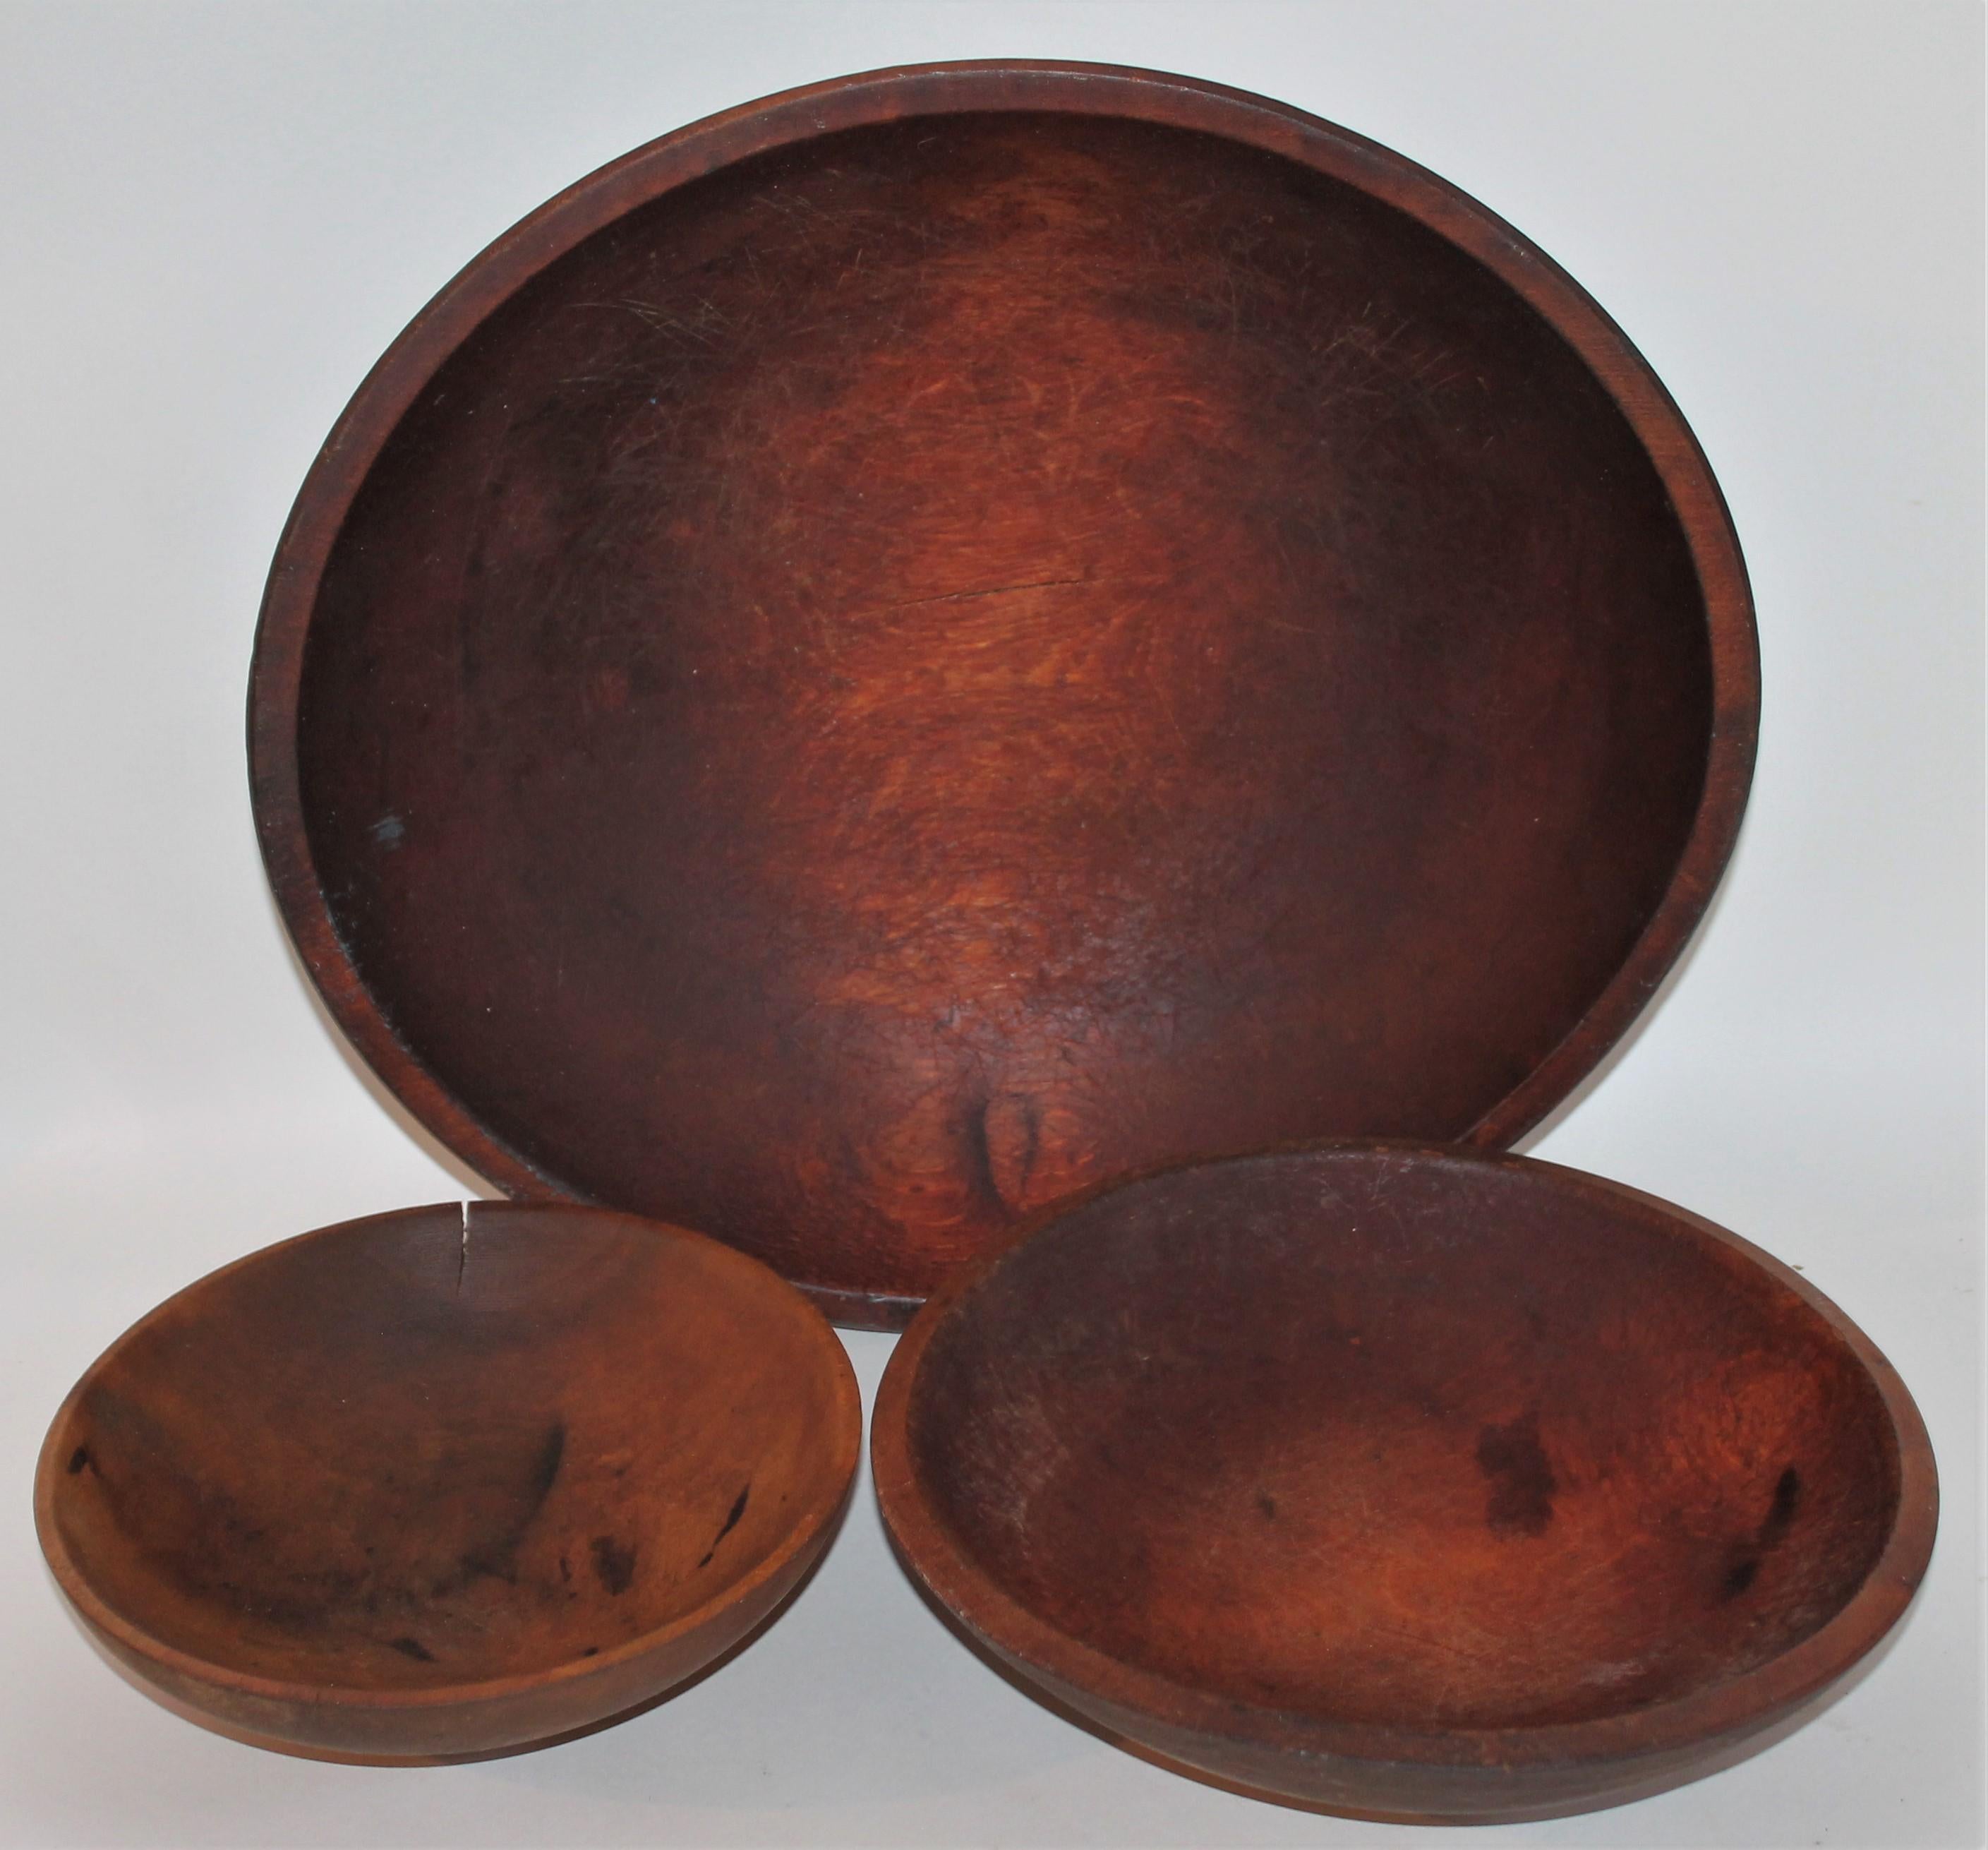 14 diameter x 4 high. These three butter bowls were found in New England and are all in fine condition. Sizes are as listed and sold as a collection of three.
Measures: 10 diameter x 2.5 high
8 diameter x 2 high.